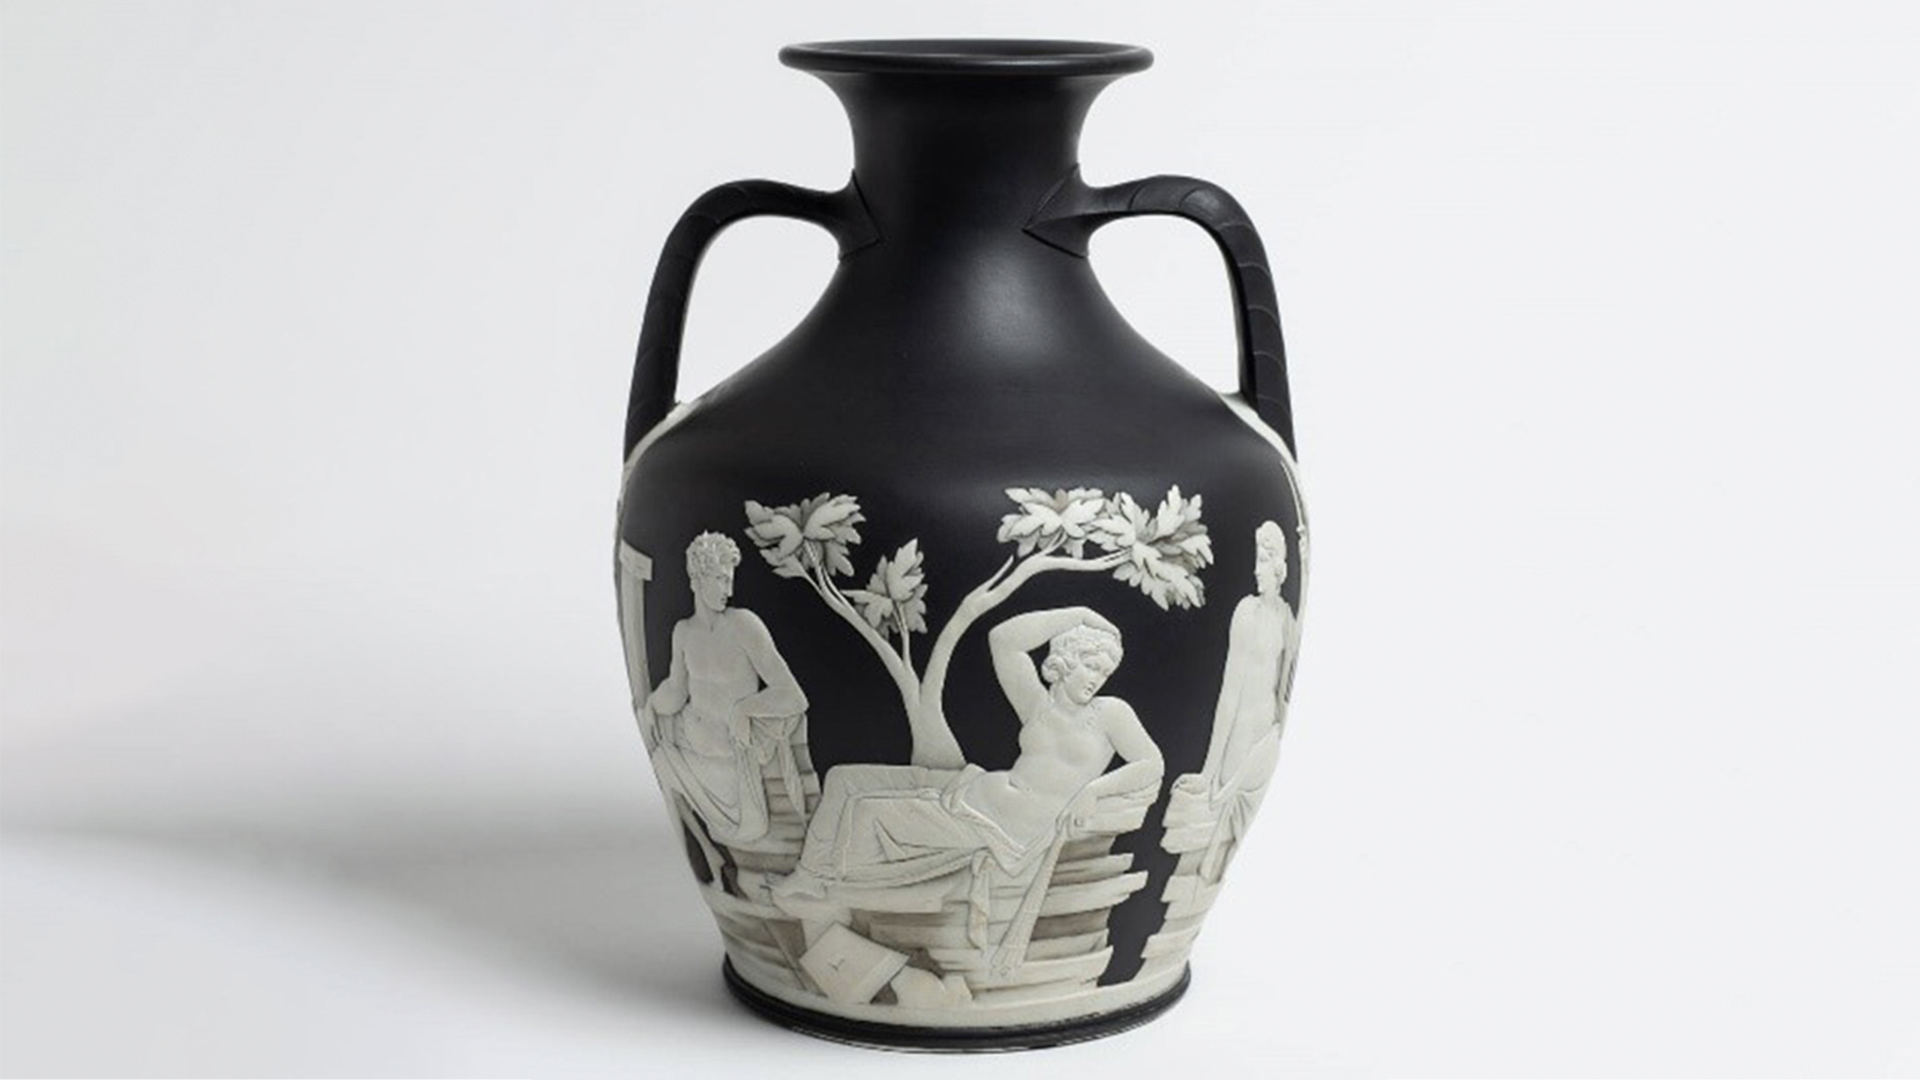 Black ceramic vase with decorative figures and leaves